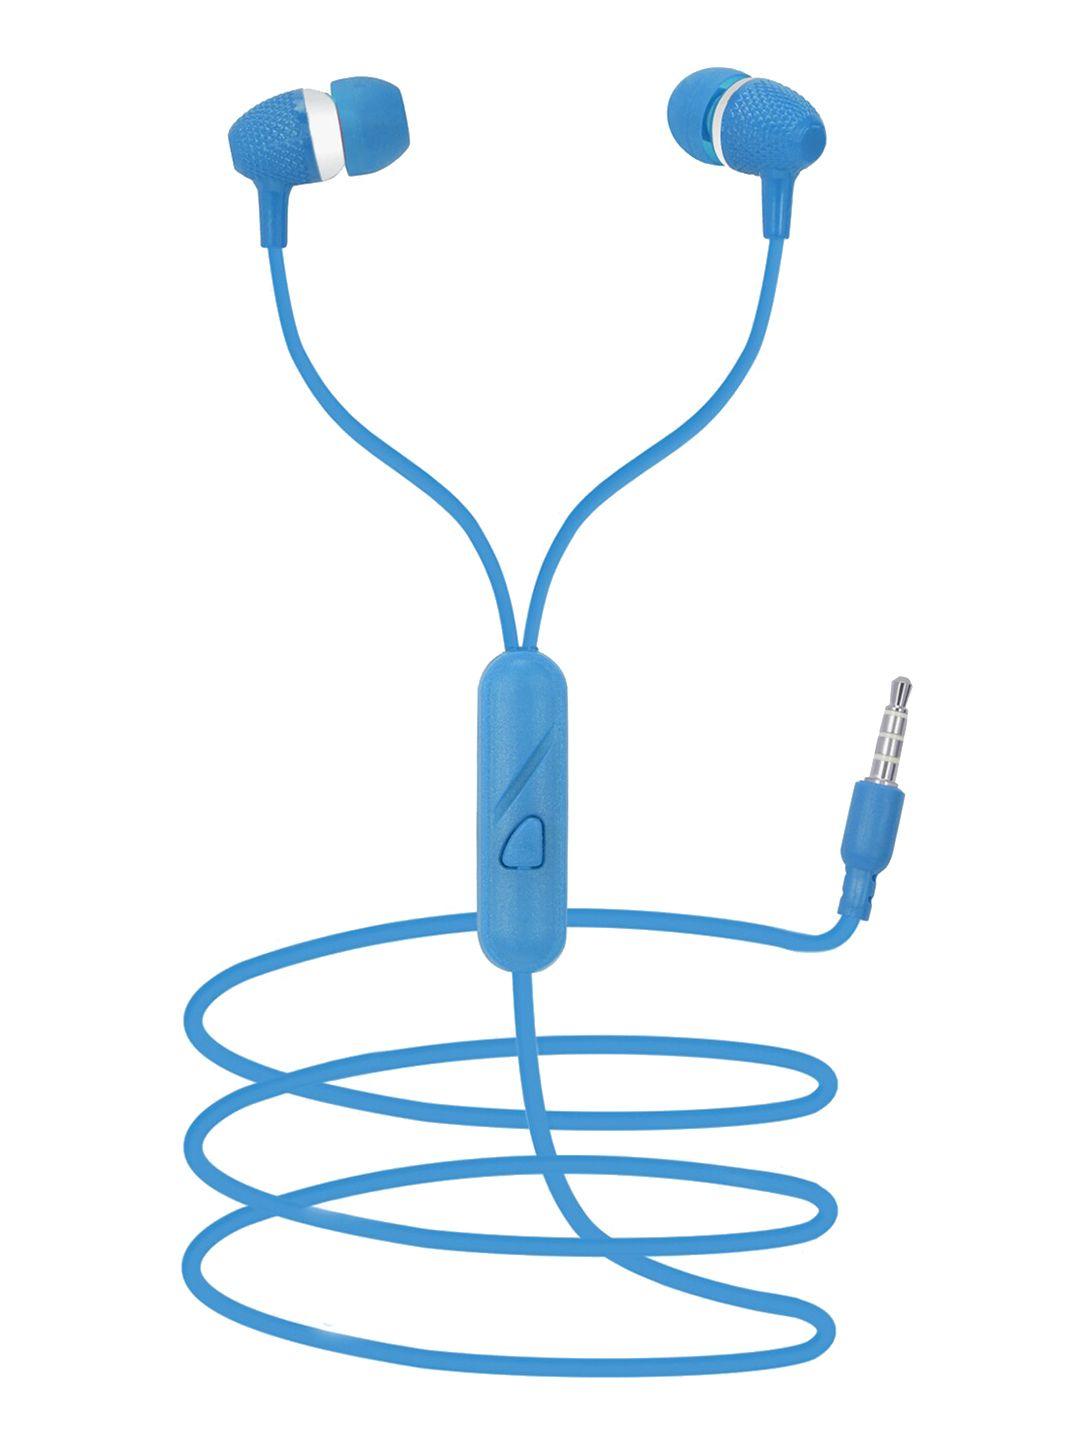 swagme blue boomdhoom ie009 in-ear wired earphones with mic